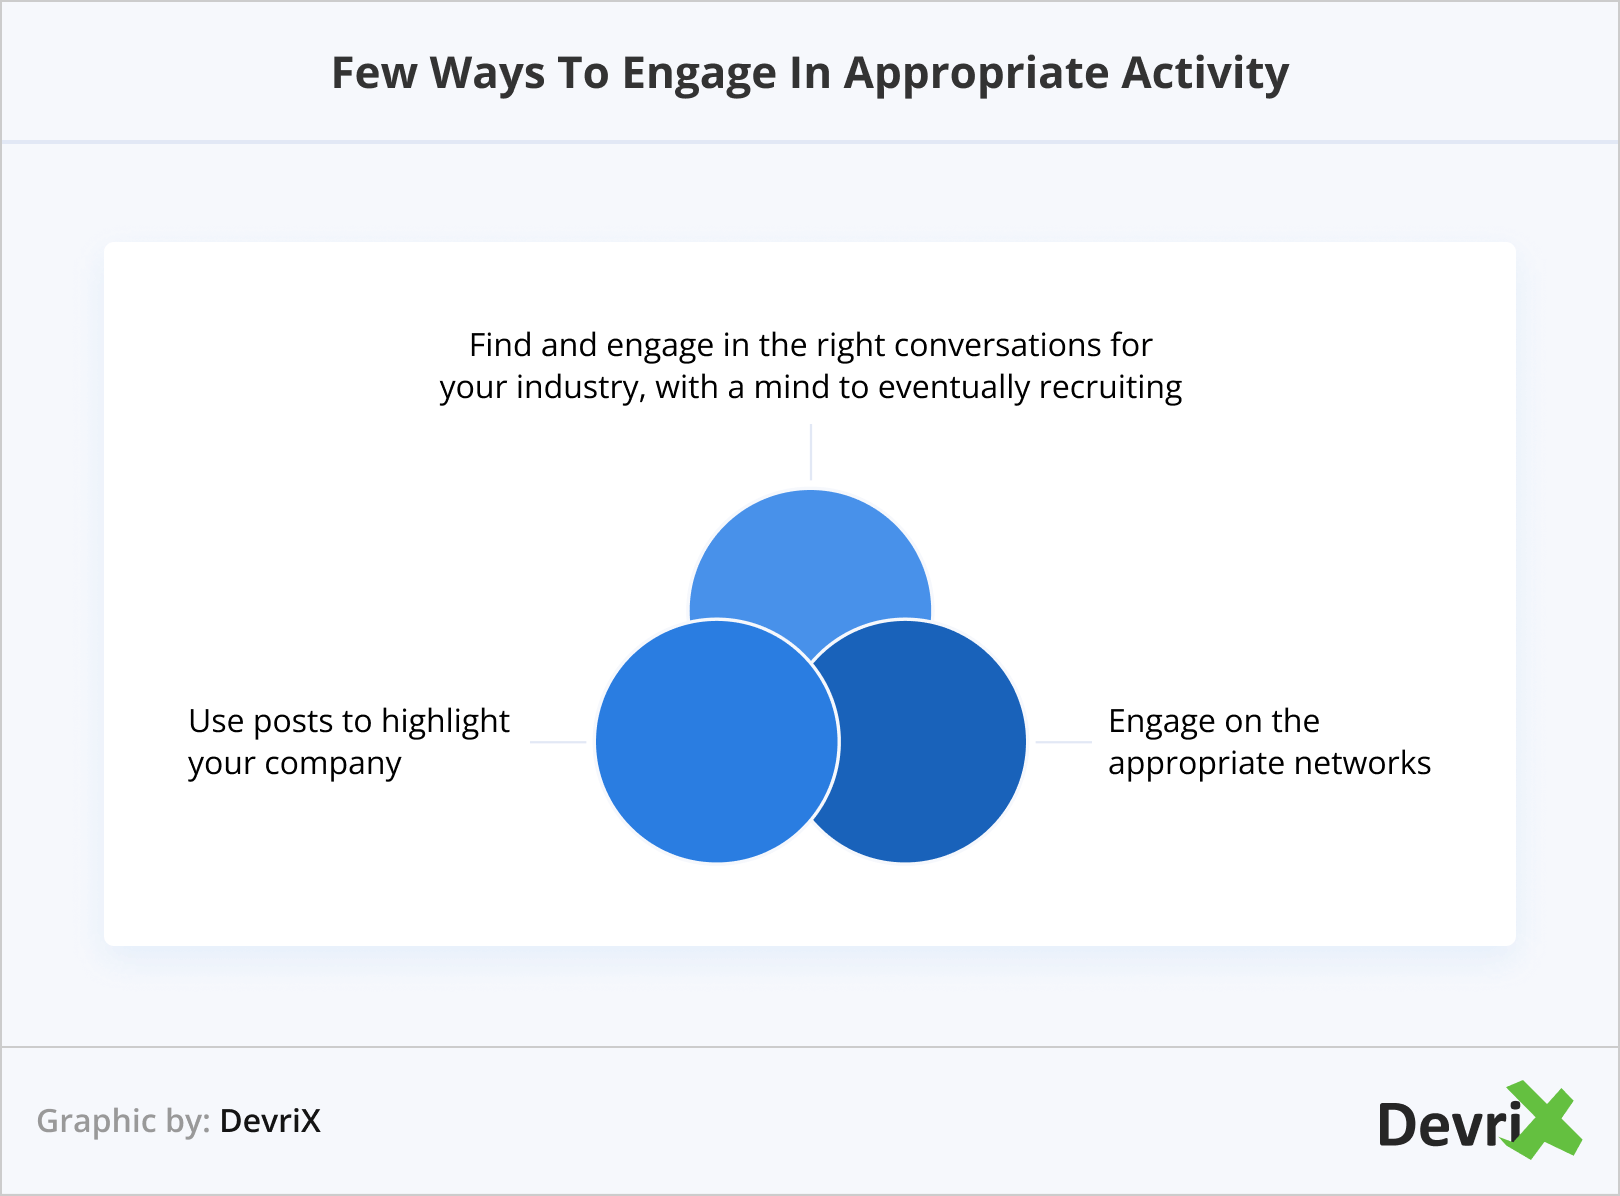 Few Ways To Engage In Appropriate Activity